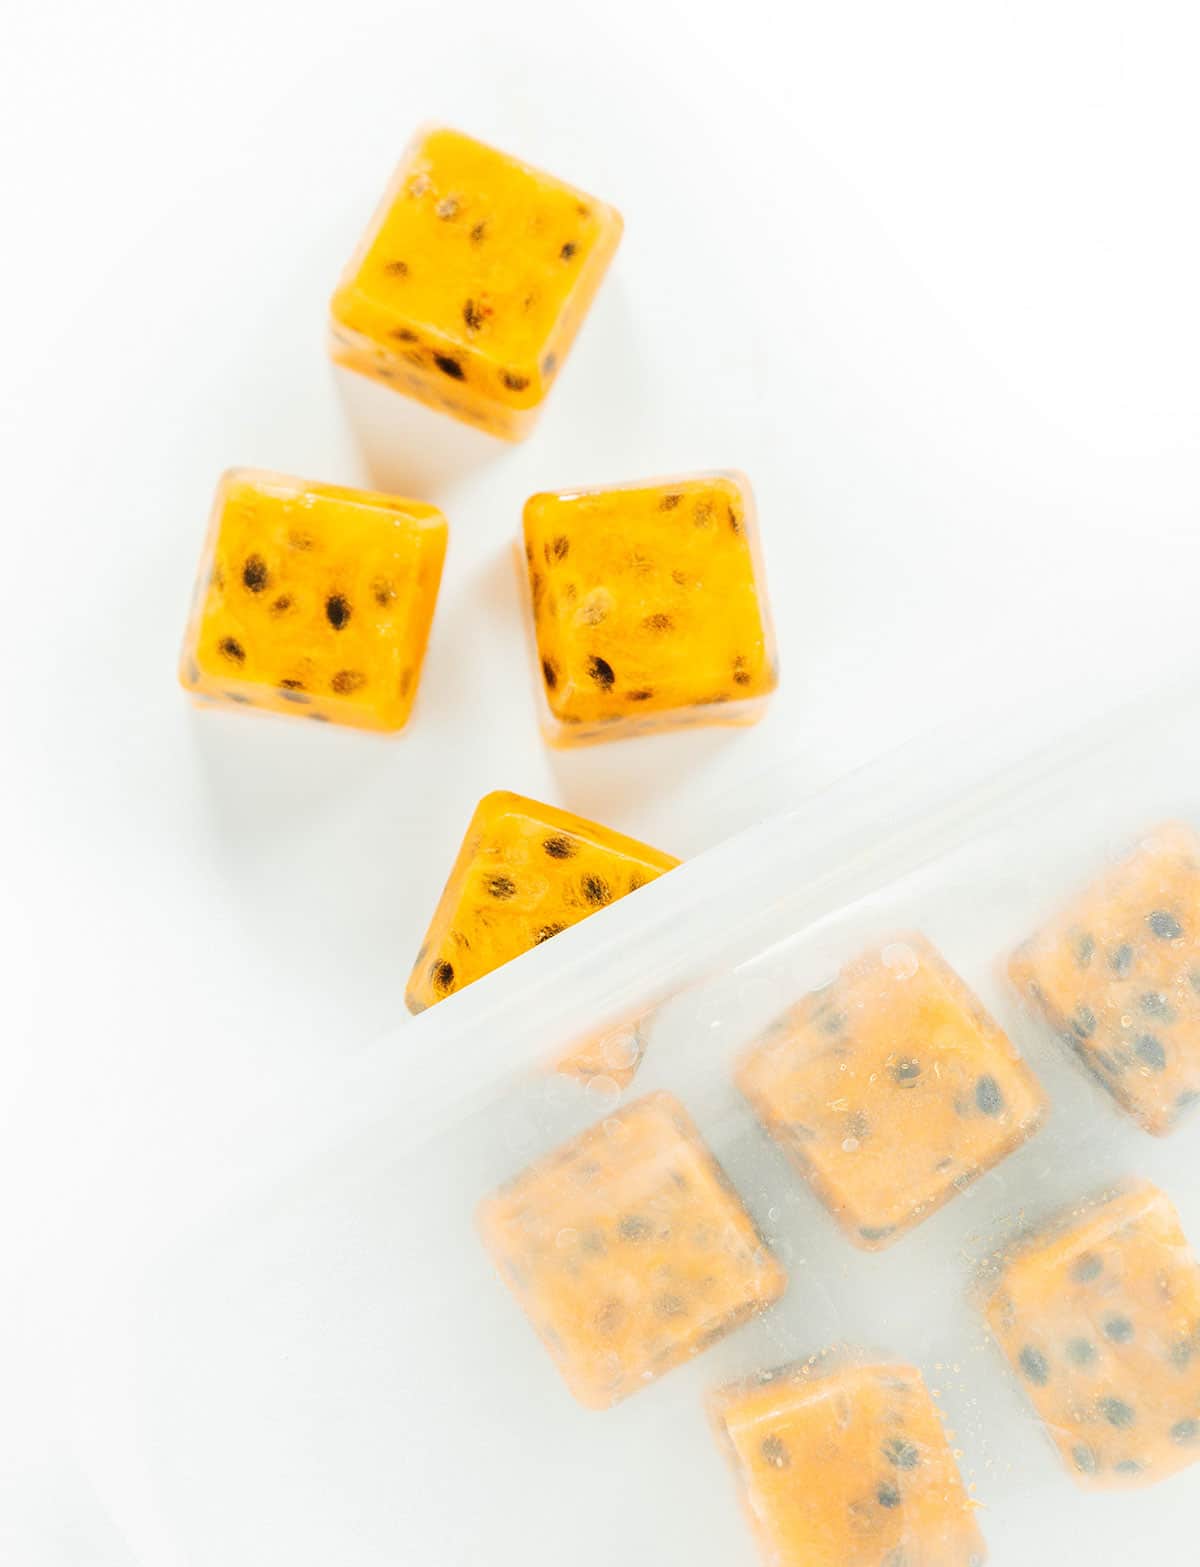 Frozen passion fruit cubes being poured out of a Ziploc bag.